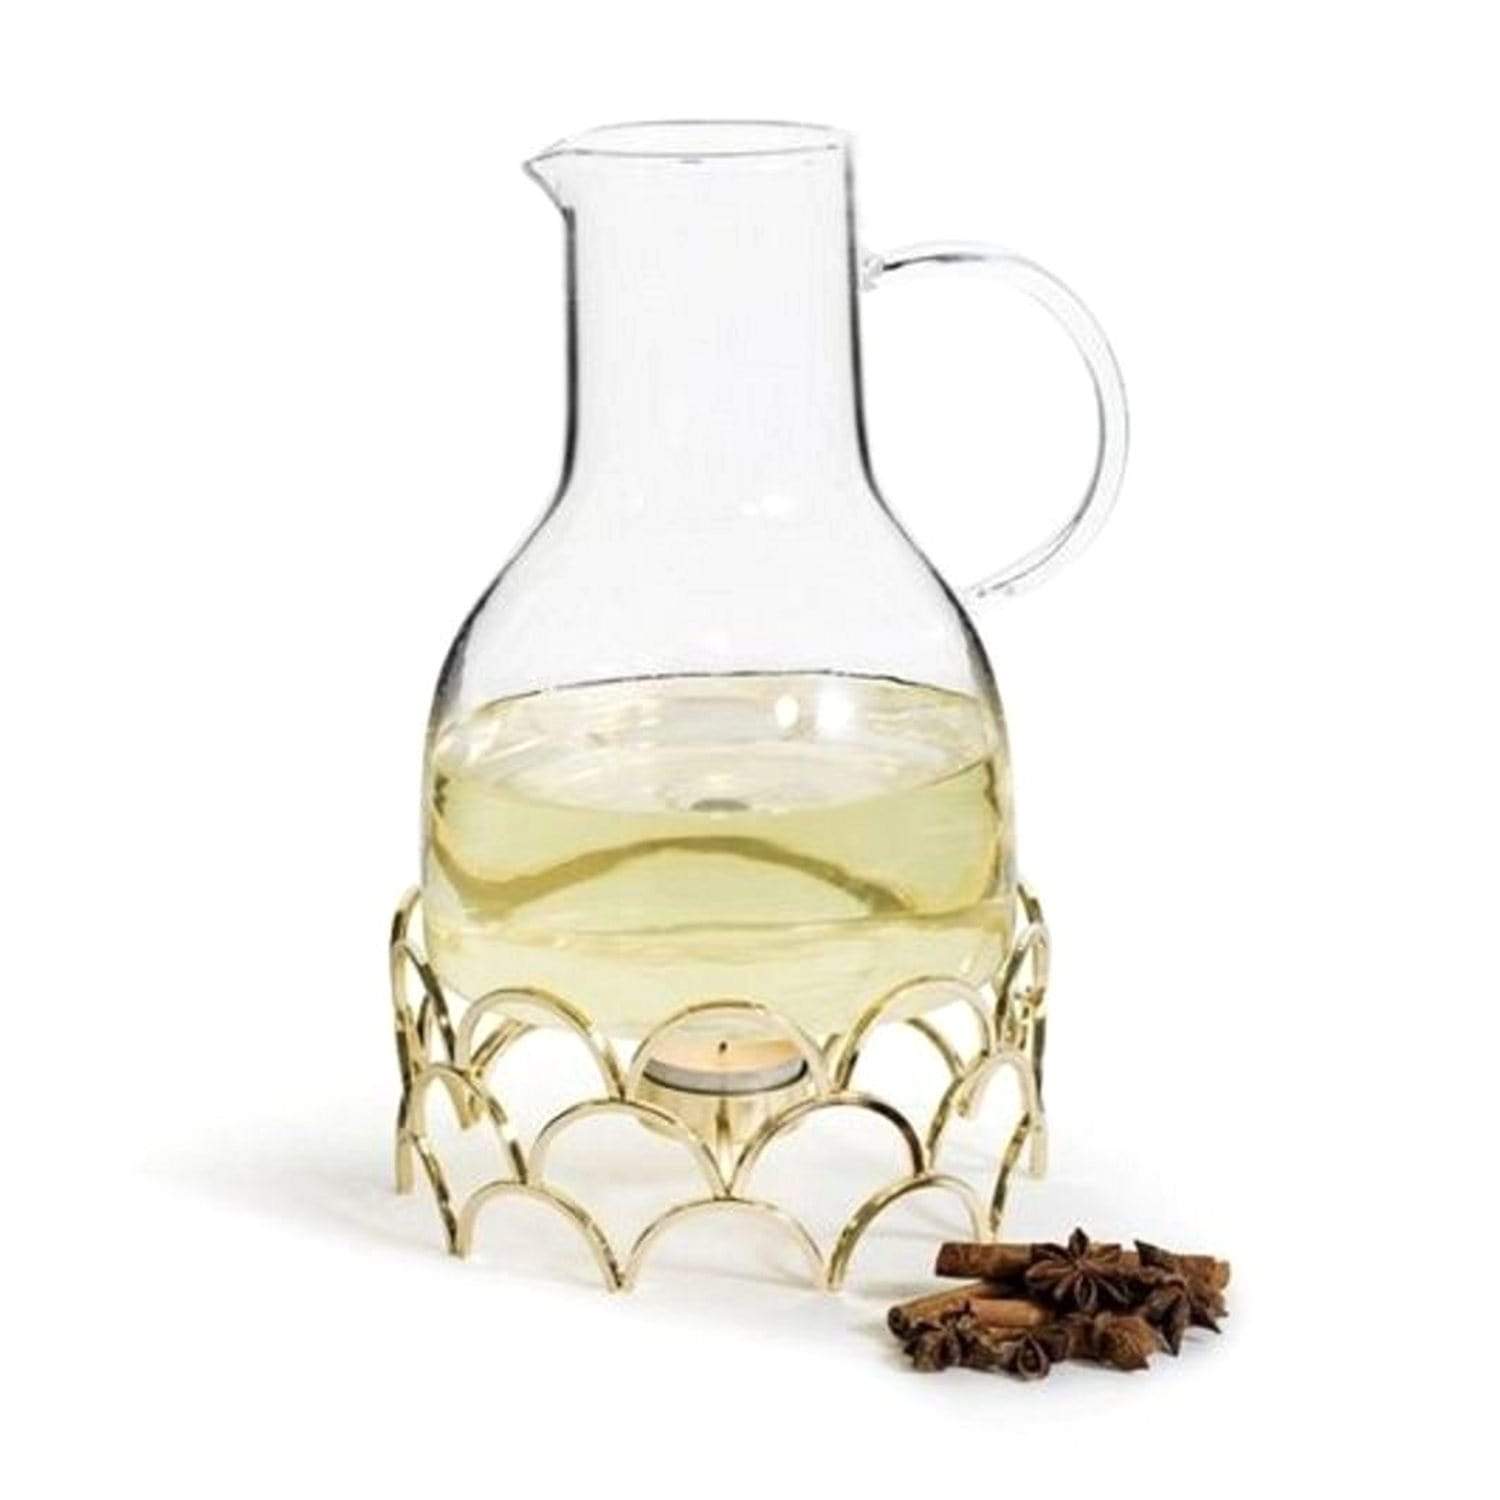 Sagaform Mulled Wine Pitcher With Heater - Clear and Gold, 1.3 Litre - SA5017678 - Jashanmal Home